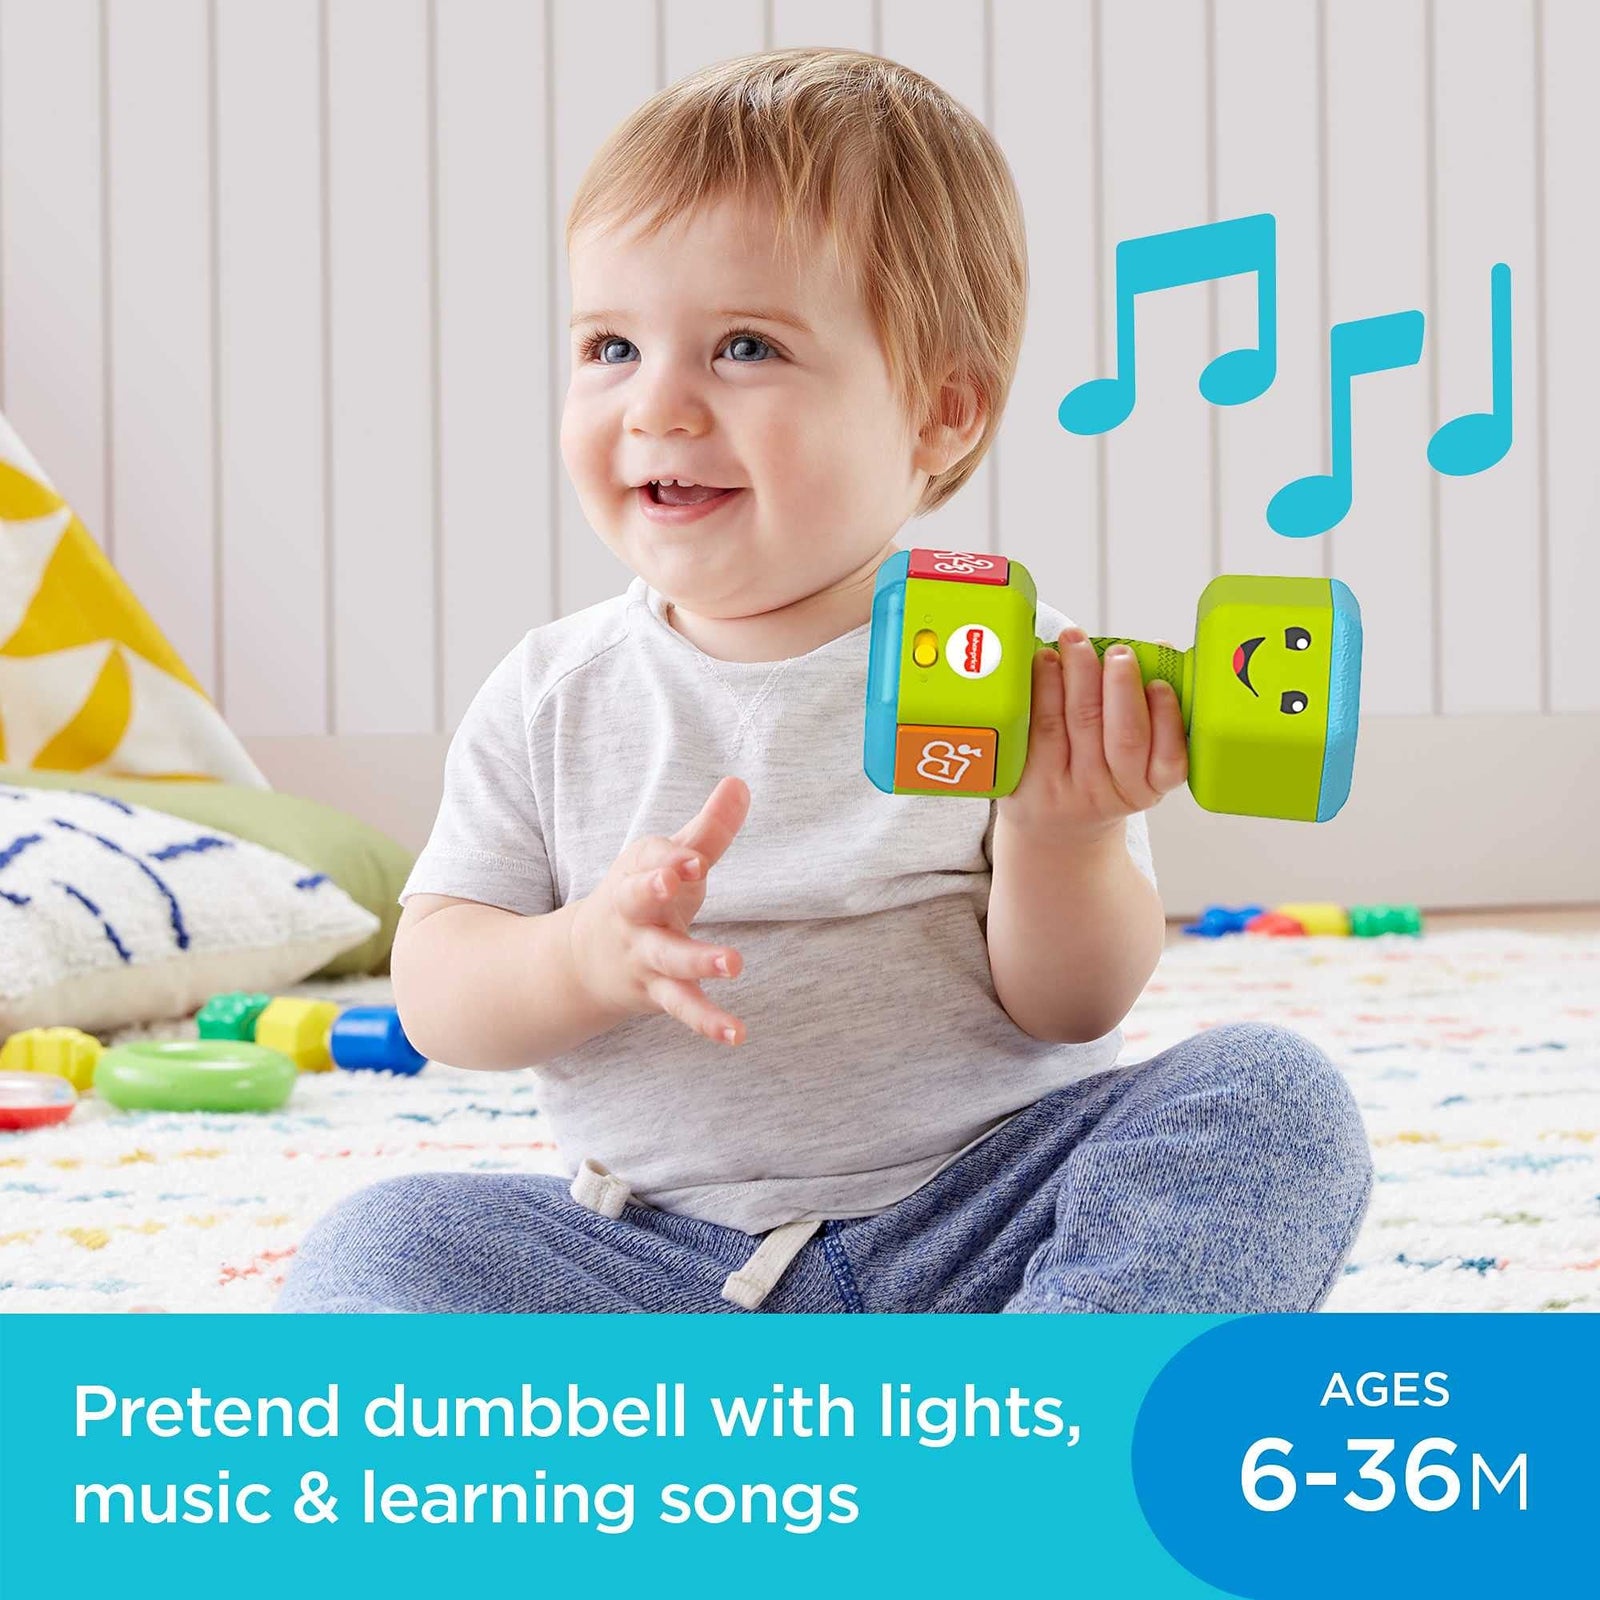 Fisher-Price Laugh & Learn Countin' Reps Dumbbell rattle toy with music, lights and learning content for baby and toddler ages 6-36 months